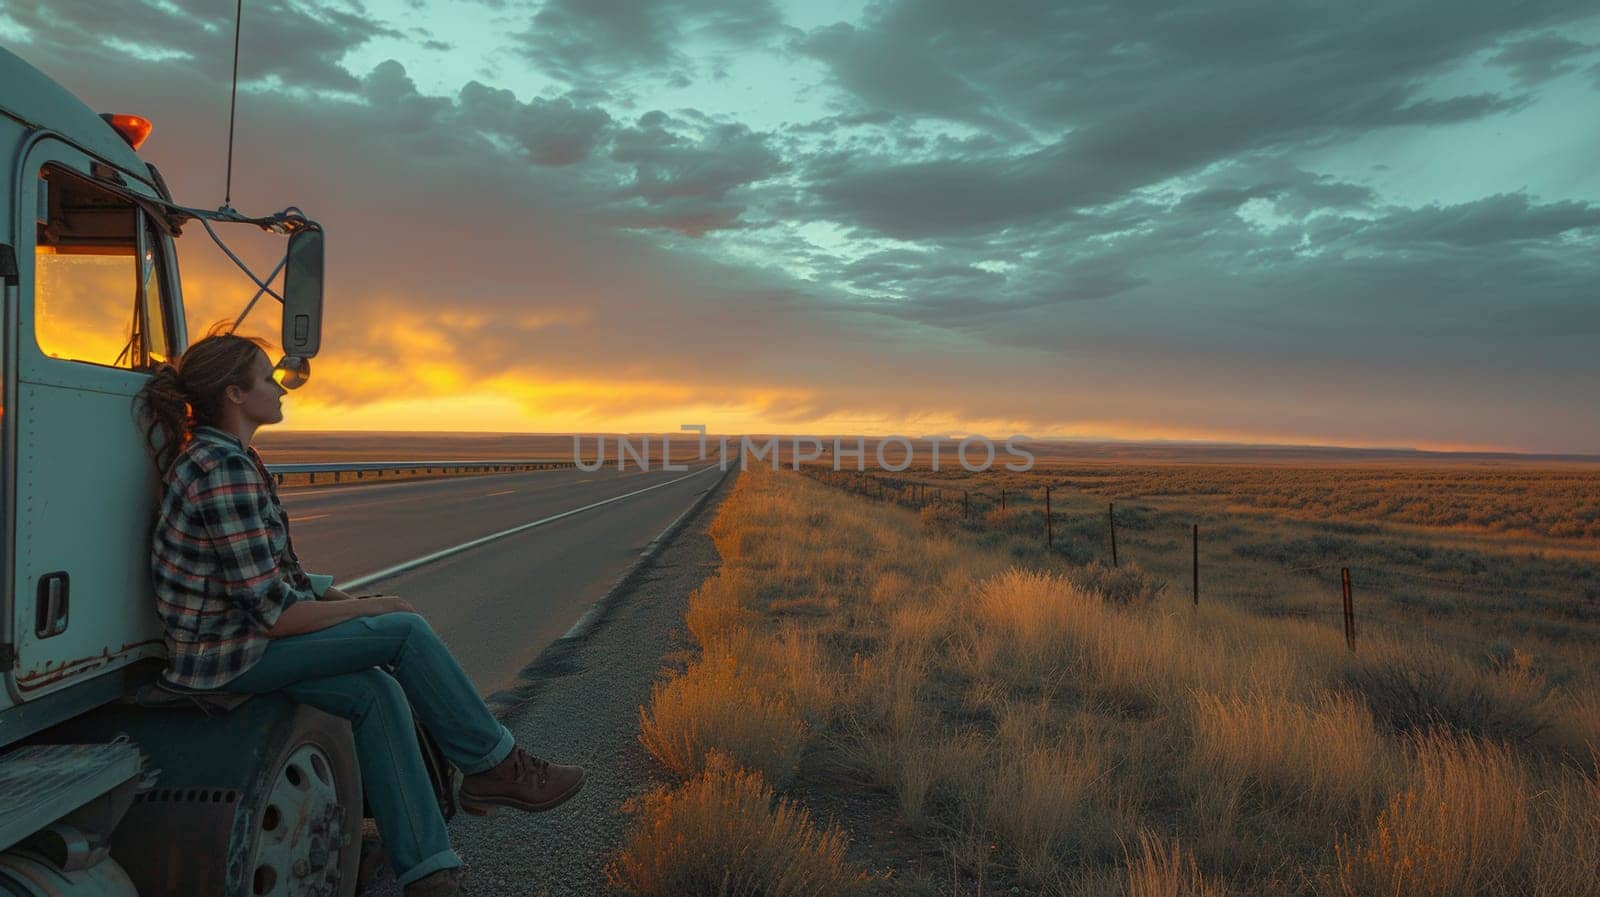 A woman sitting on the side of a truck looking out at sunset, AI by starush